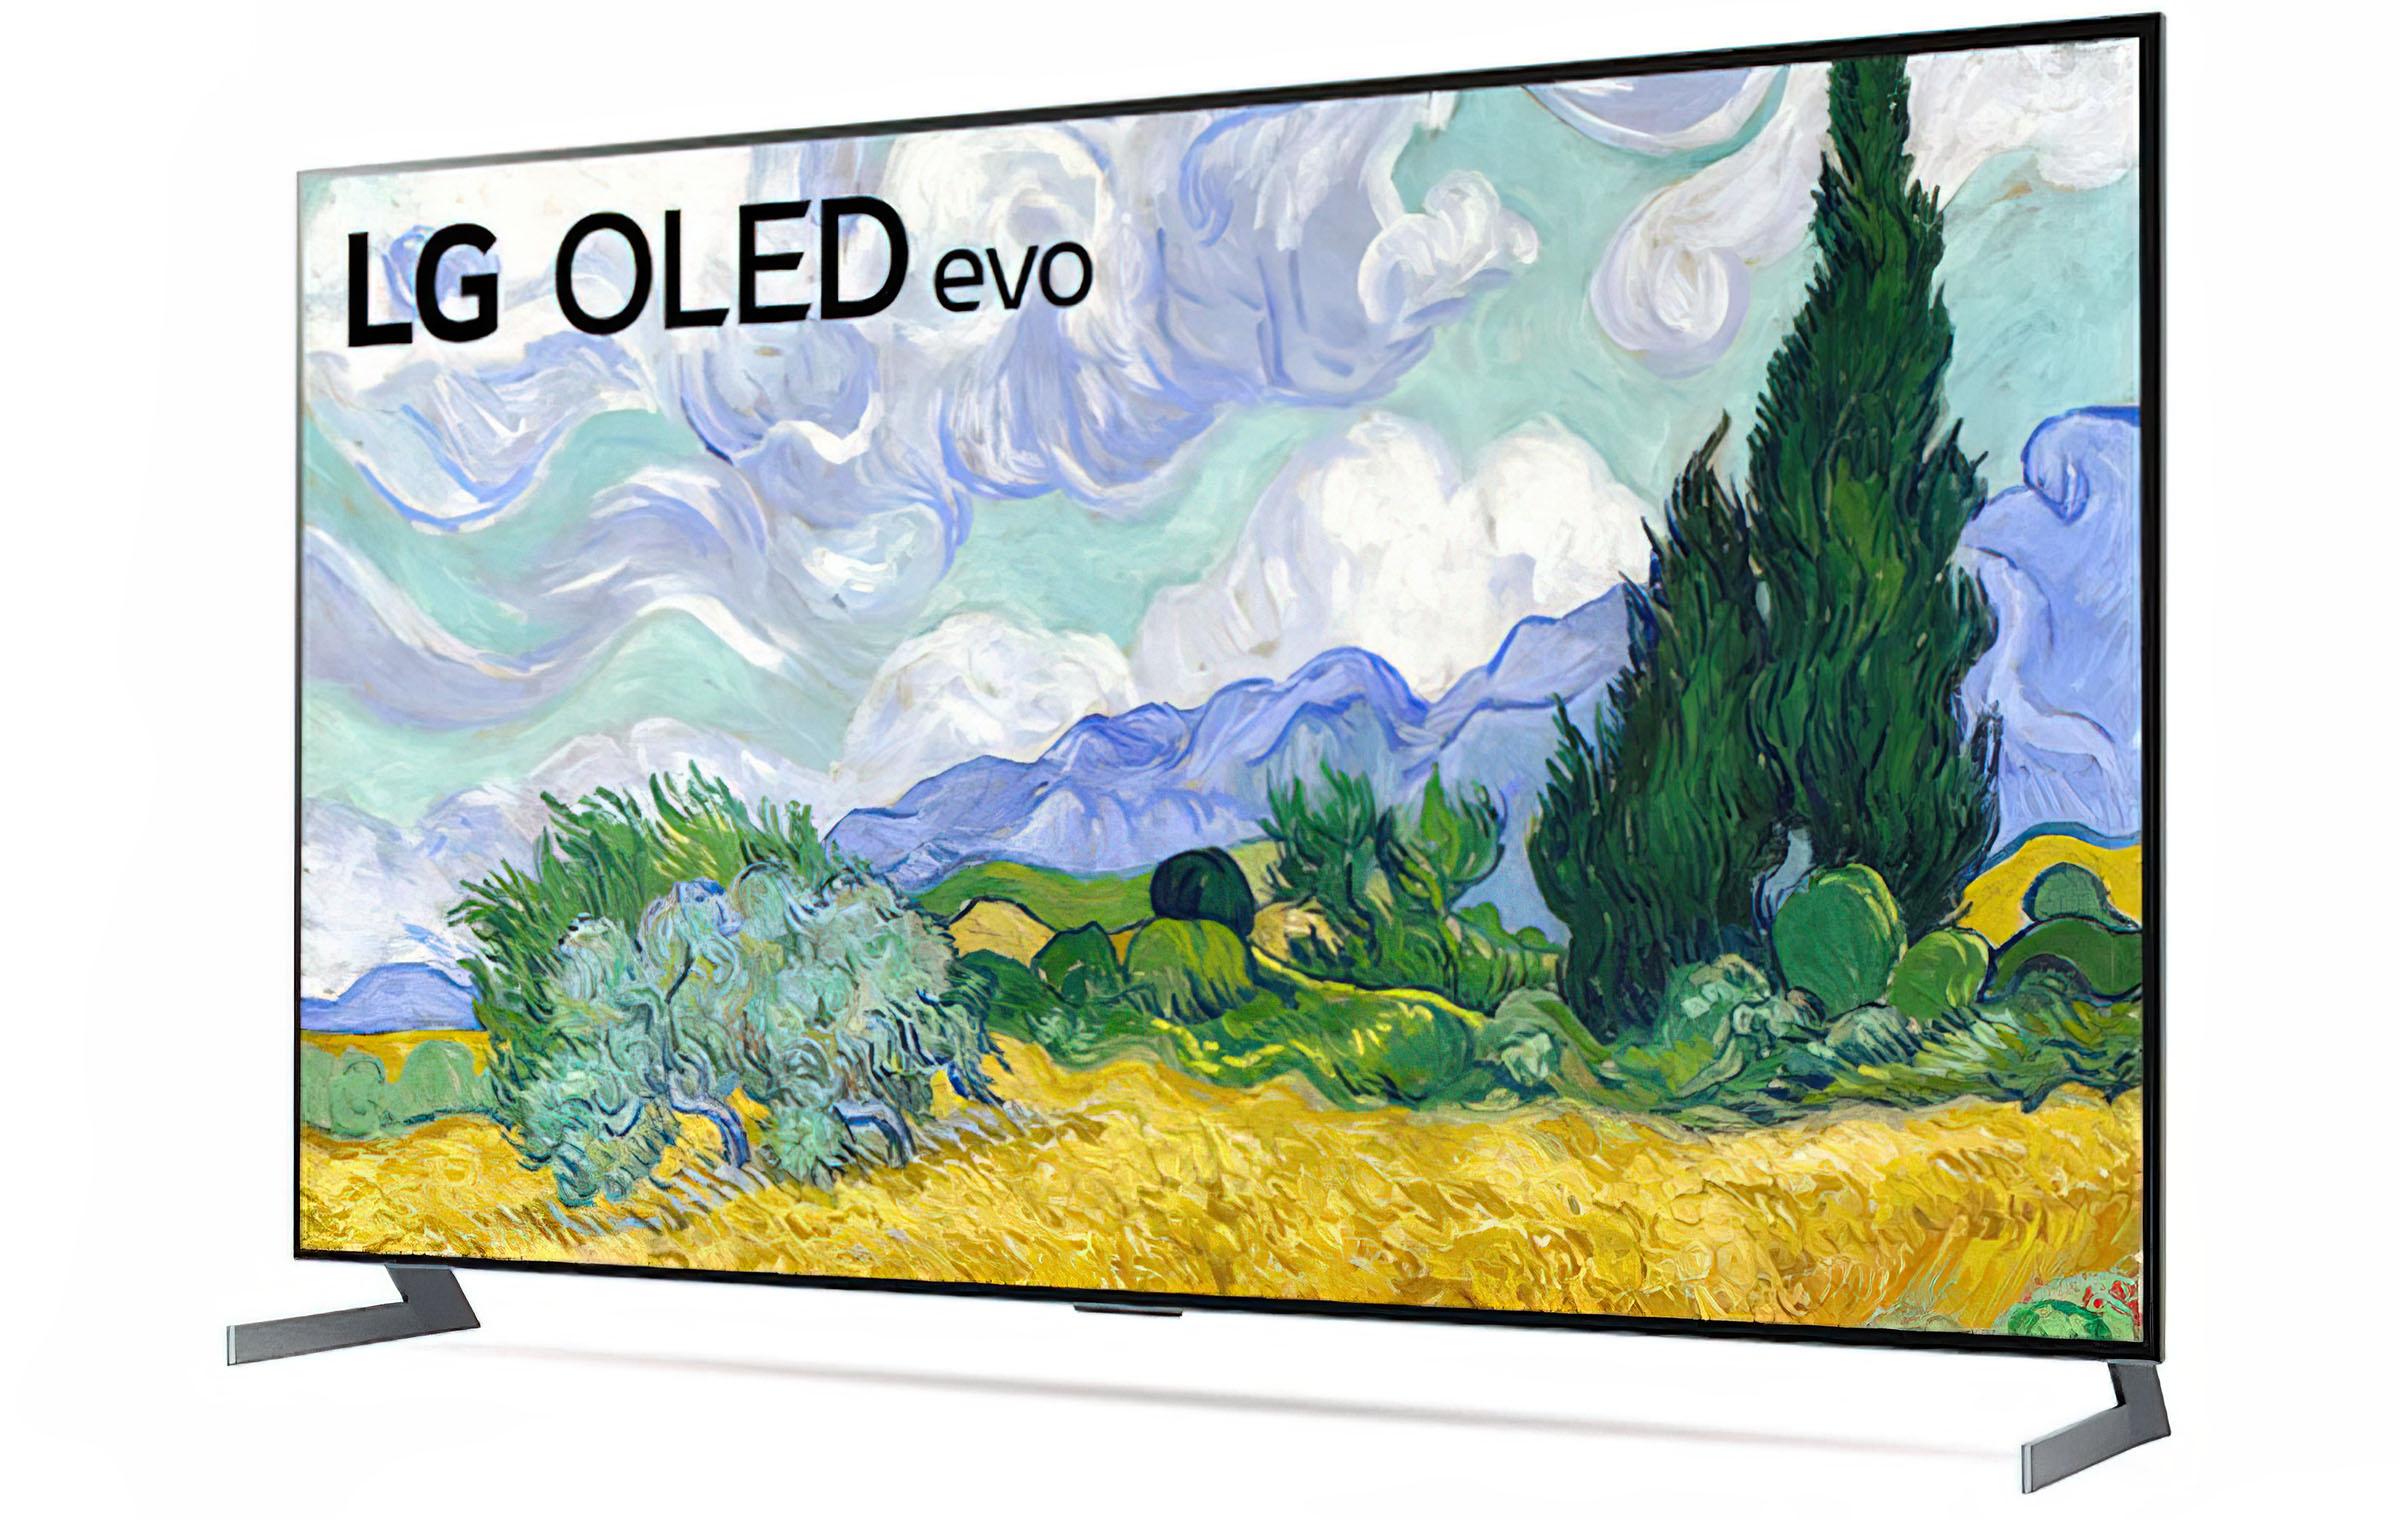 LG's brightest OLED yet is also its best 4K TV ever. If you’re looking to put a TV on your wall, there’s no reason to look any further than the LG G1.